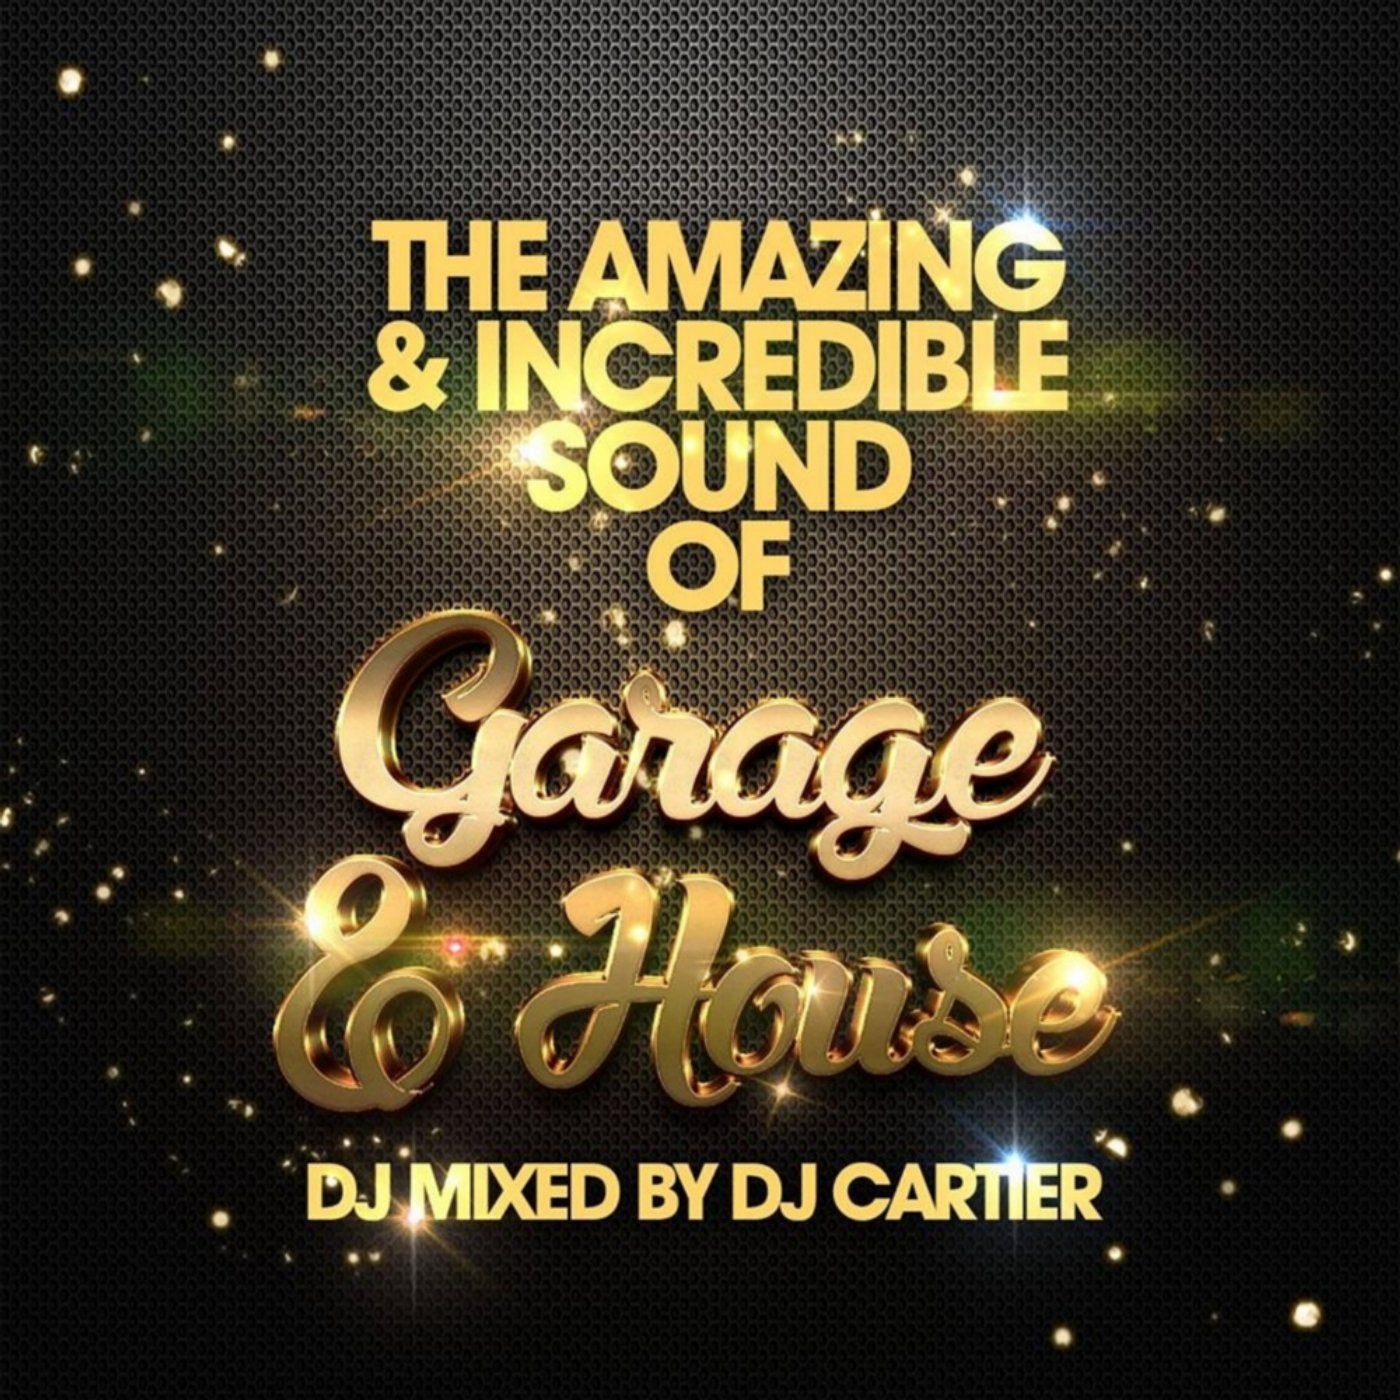 The Amazing & Incredible Sound of Garage, & House!